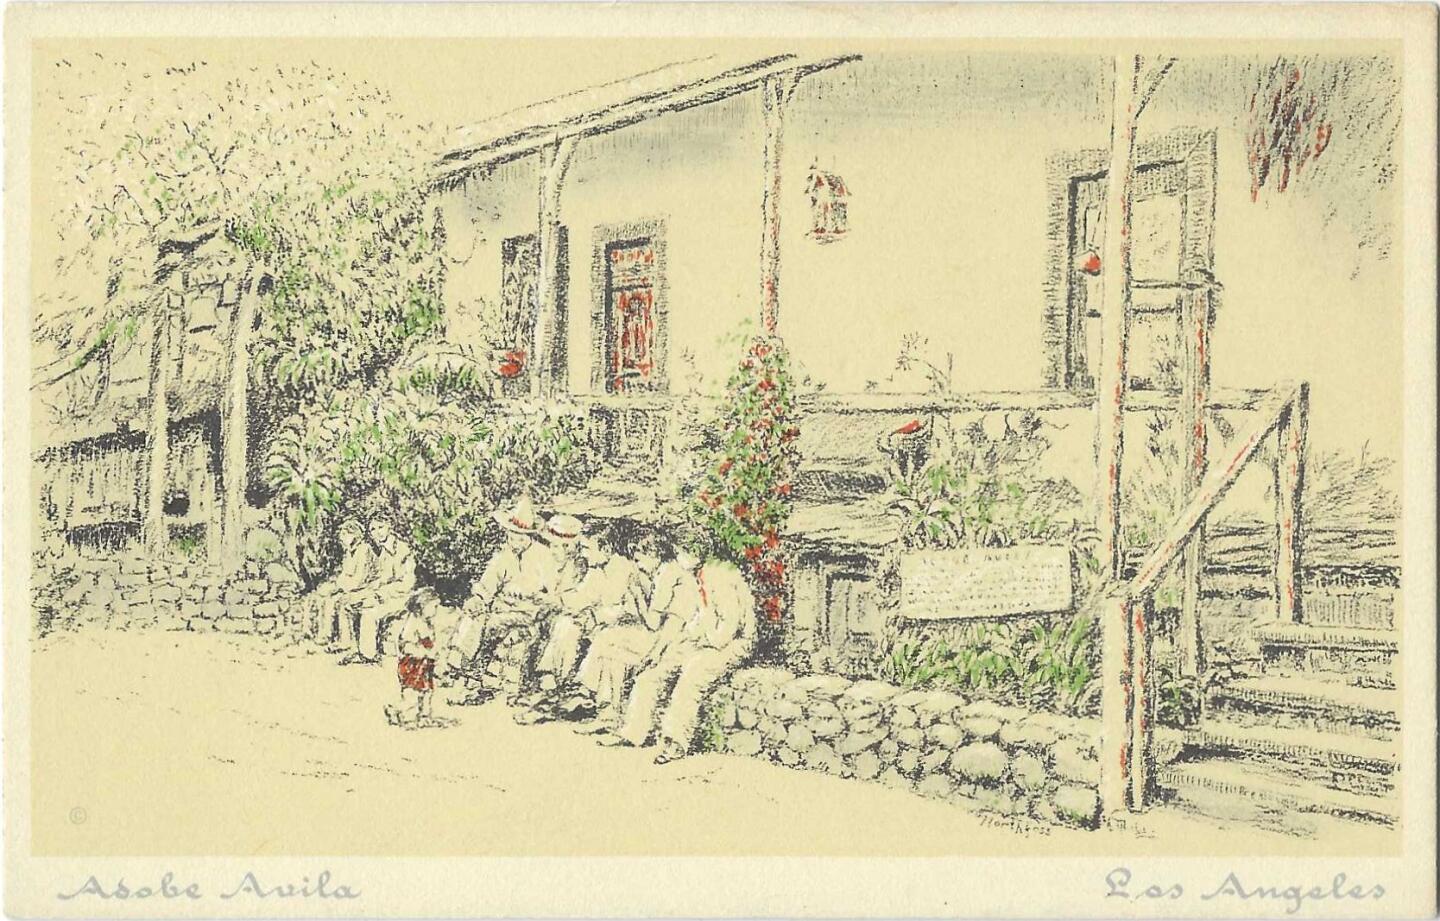 Another postcard of the Avila Adobe